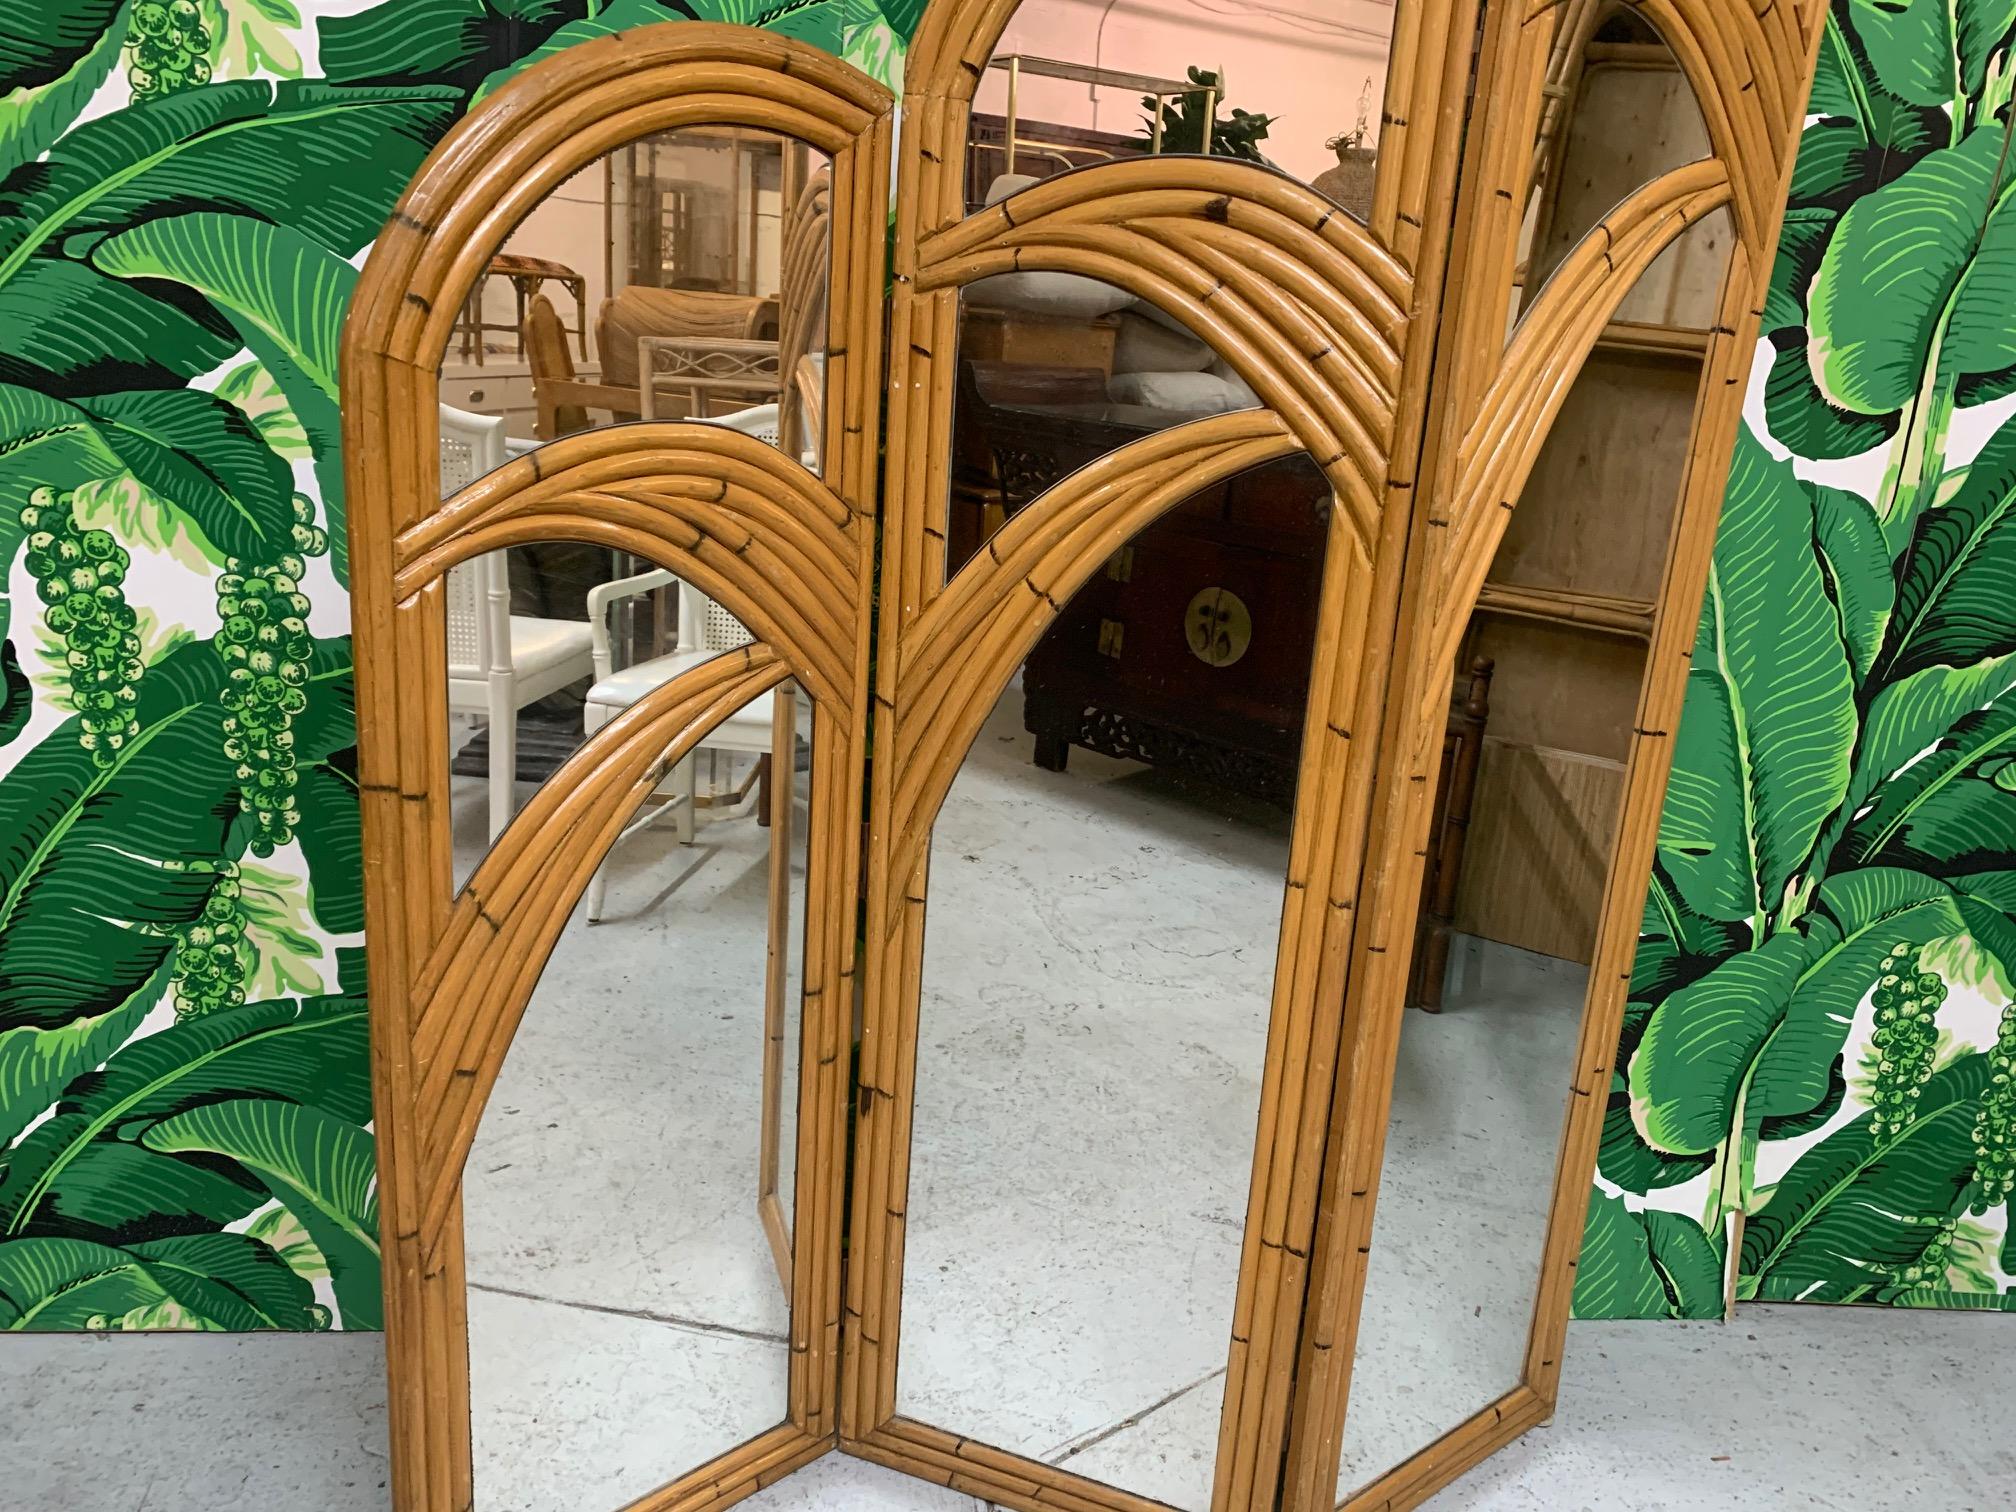 3-panel room divider features veneer of pencil reed rattan in a palm tree motif. Very good vintage condition with only minor imperfections consistent with age. Each panel measures 18